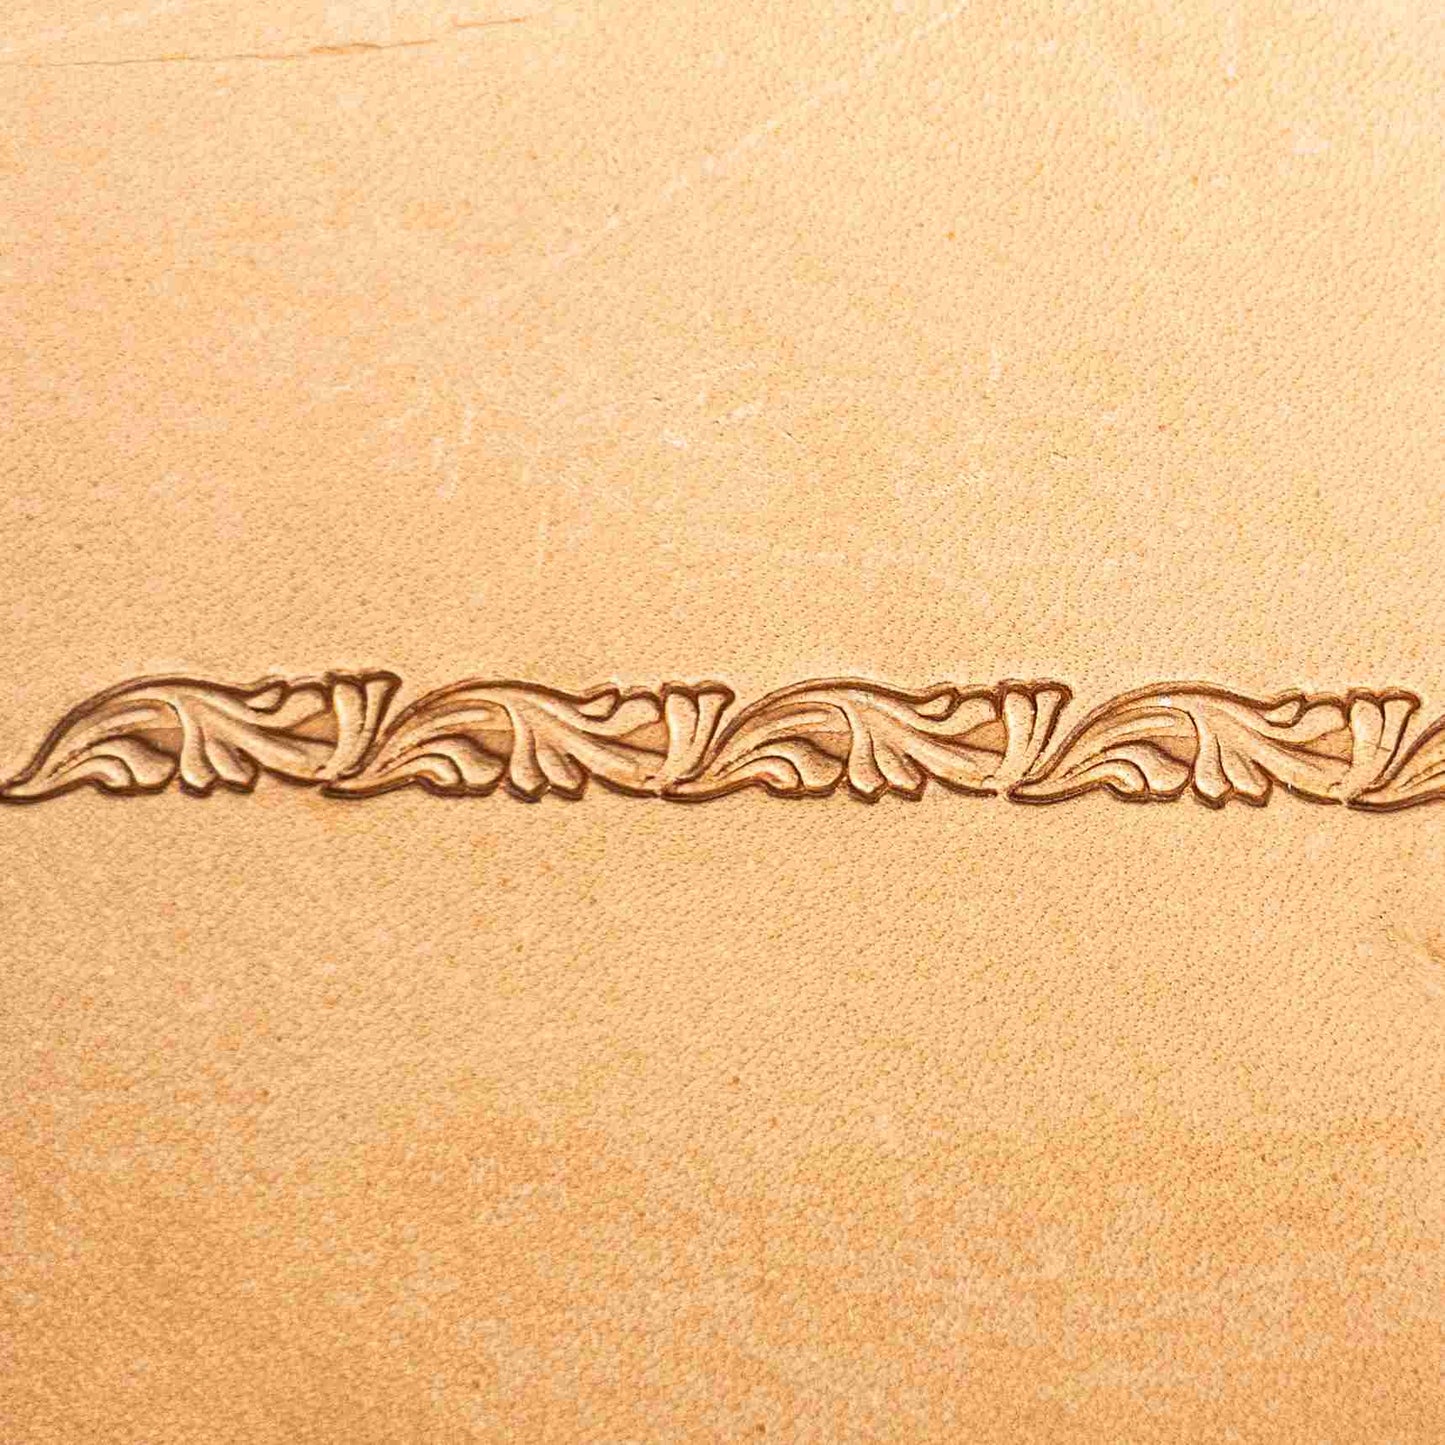 LT151 Premium Leather Stamping Tools for Professional Crafters-18x5mm size